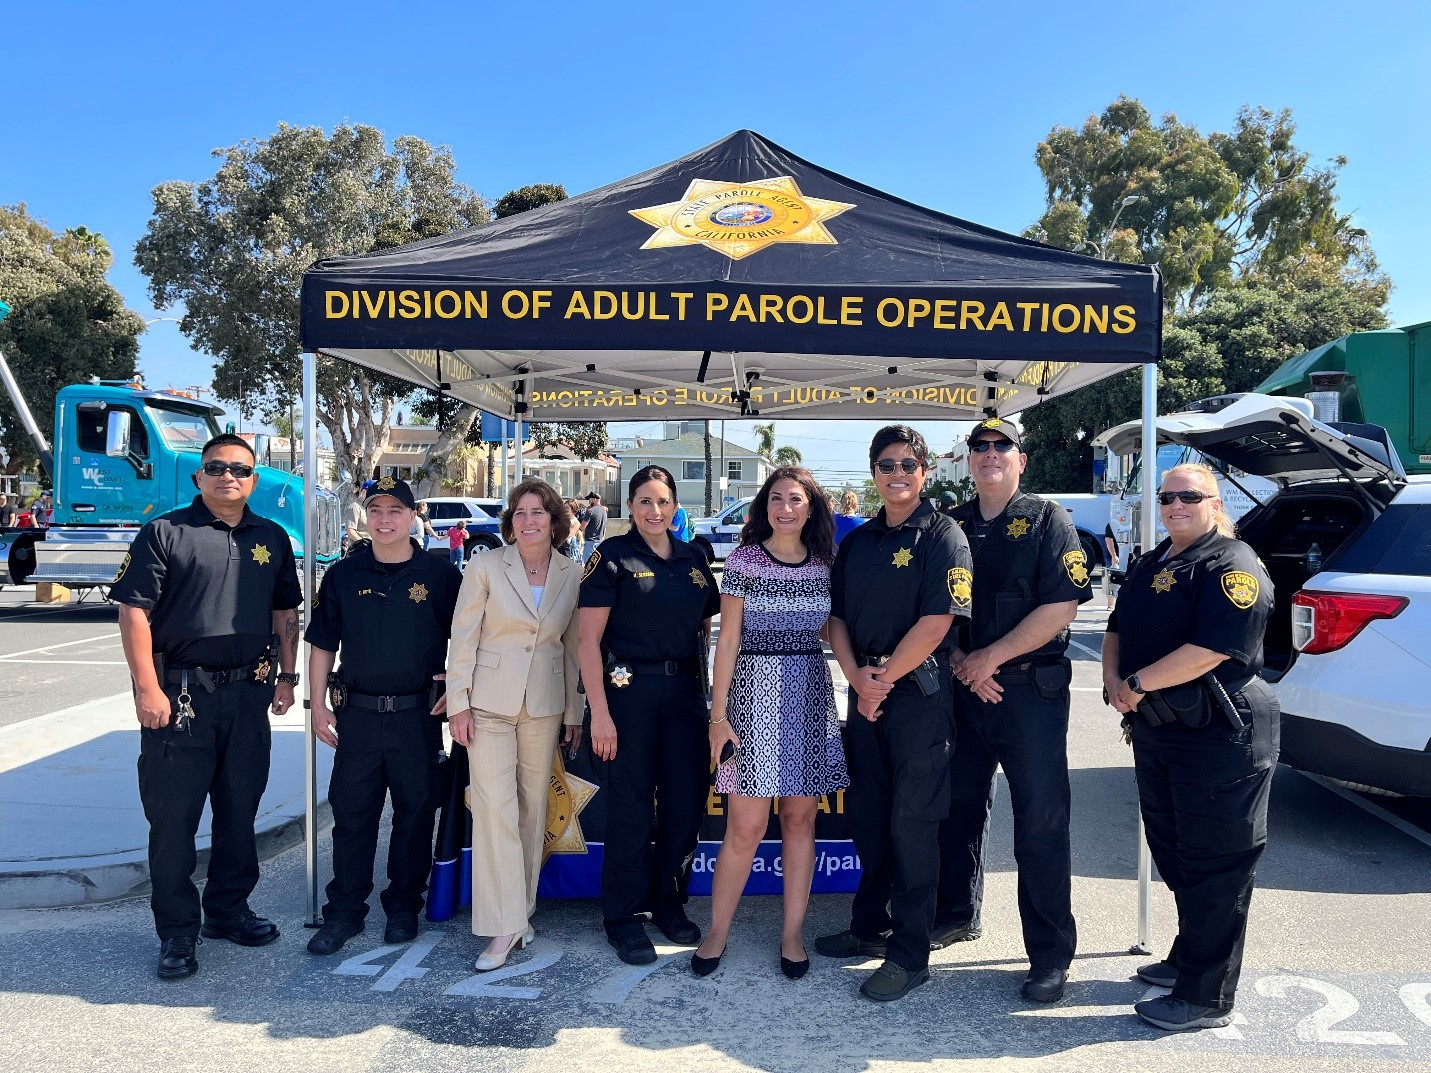 Truck event with parole agents in Long Beach.